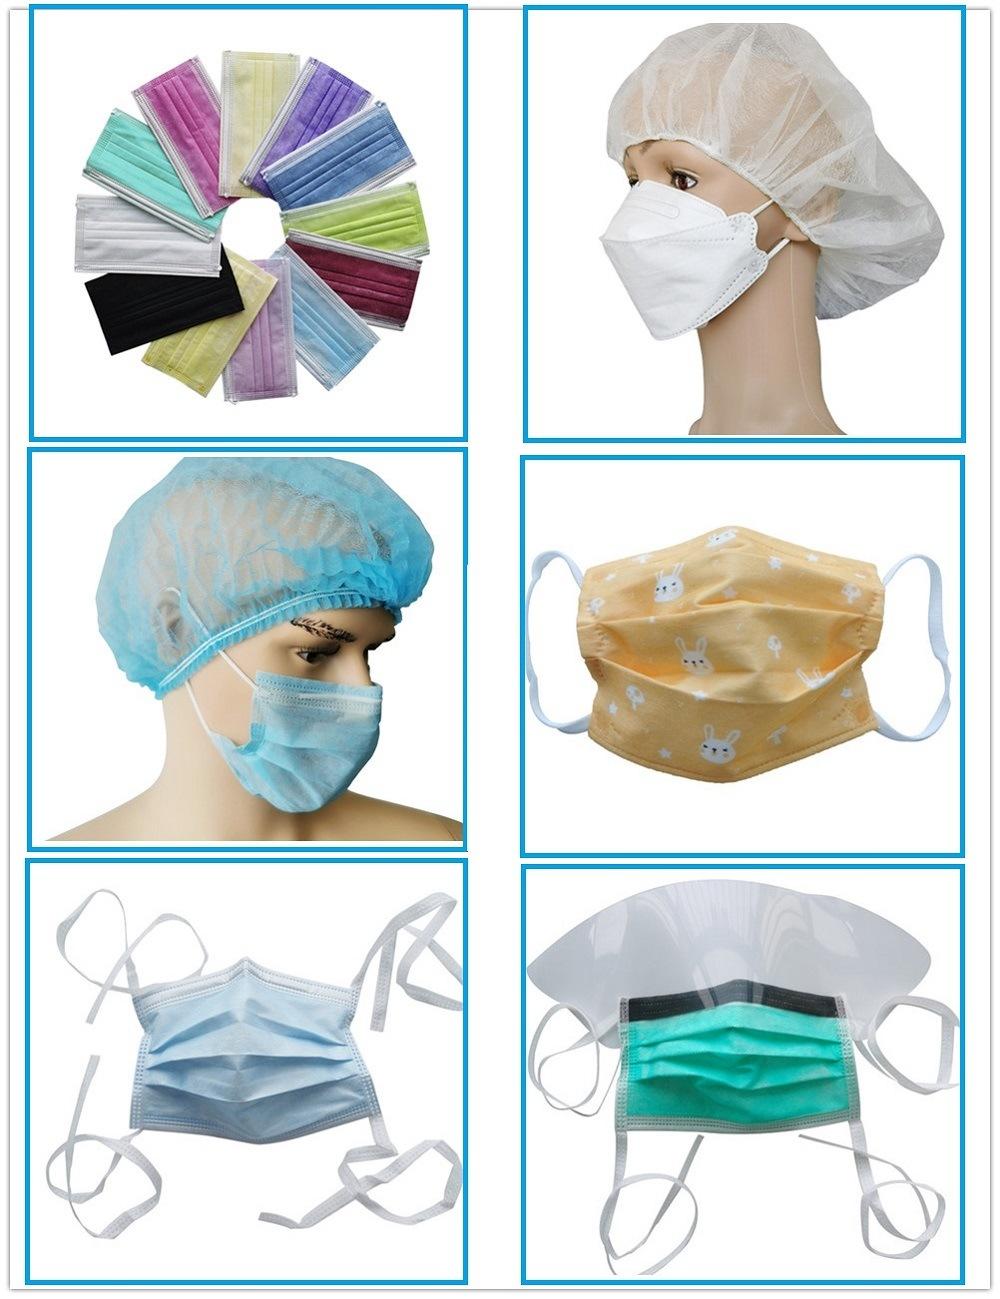 Xiantao Mask Supplier Safety Face Mask 3 Layers Rated >99% Bfe Surgical Mask Non Woven Disposable Fixed Strap Closure Surgical Mask with Ribbon